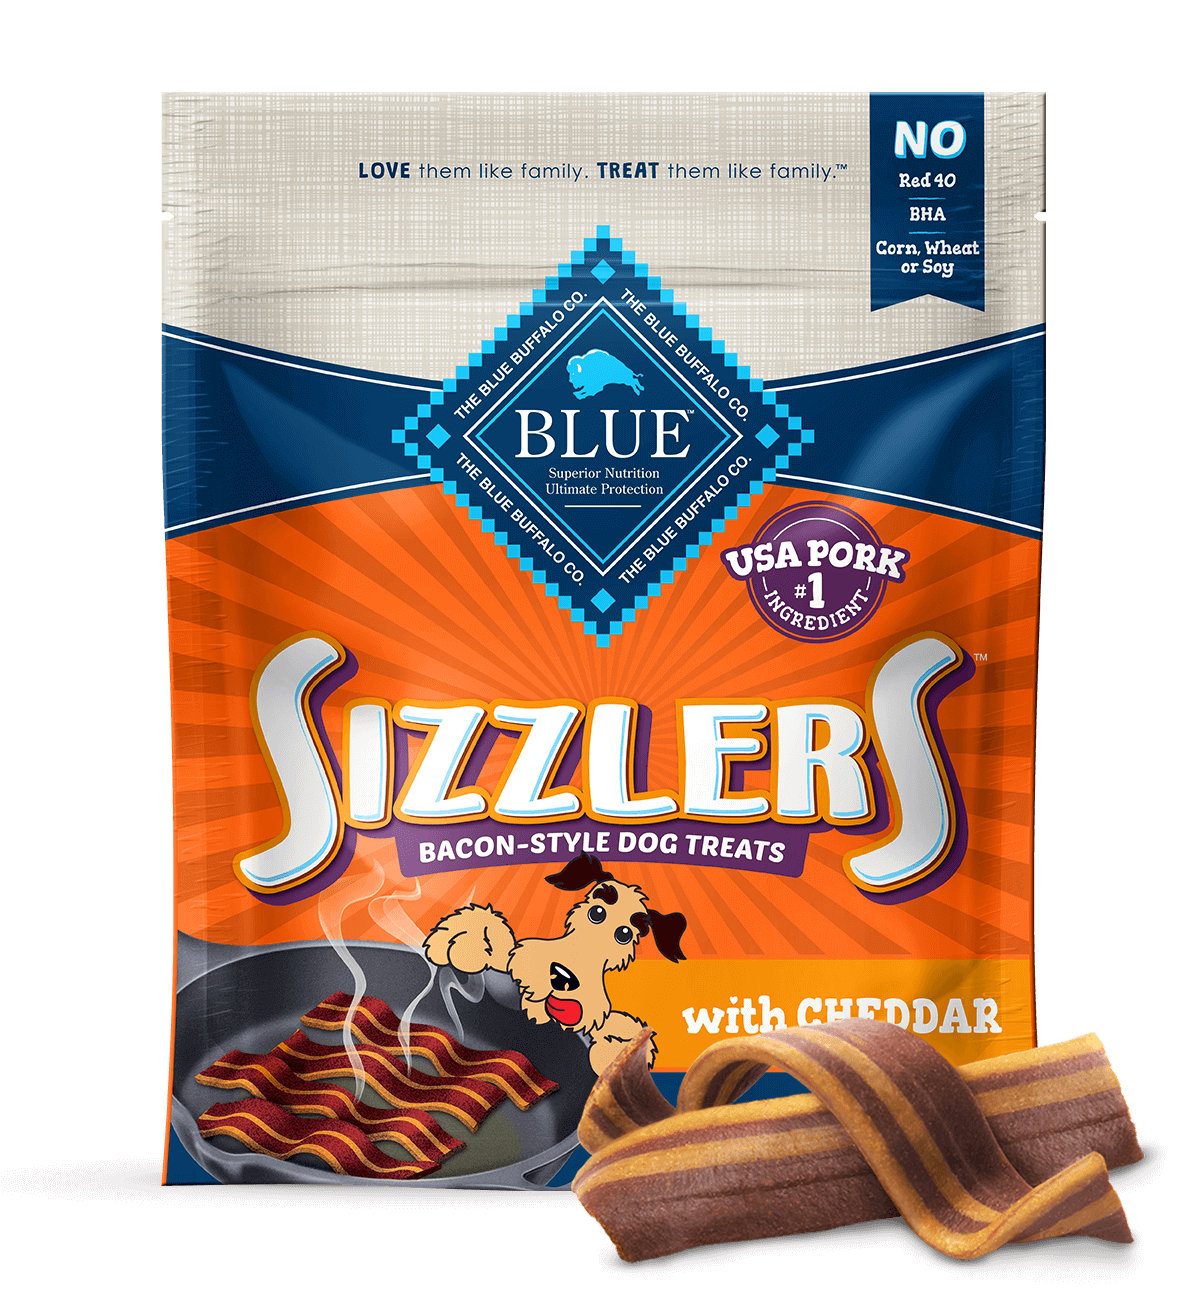 blue sizzlers bacon-style dog treats with cheddar dog treats